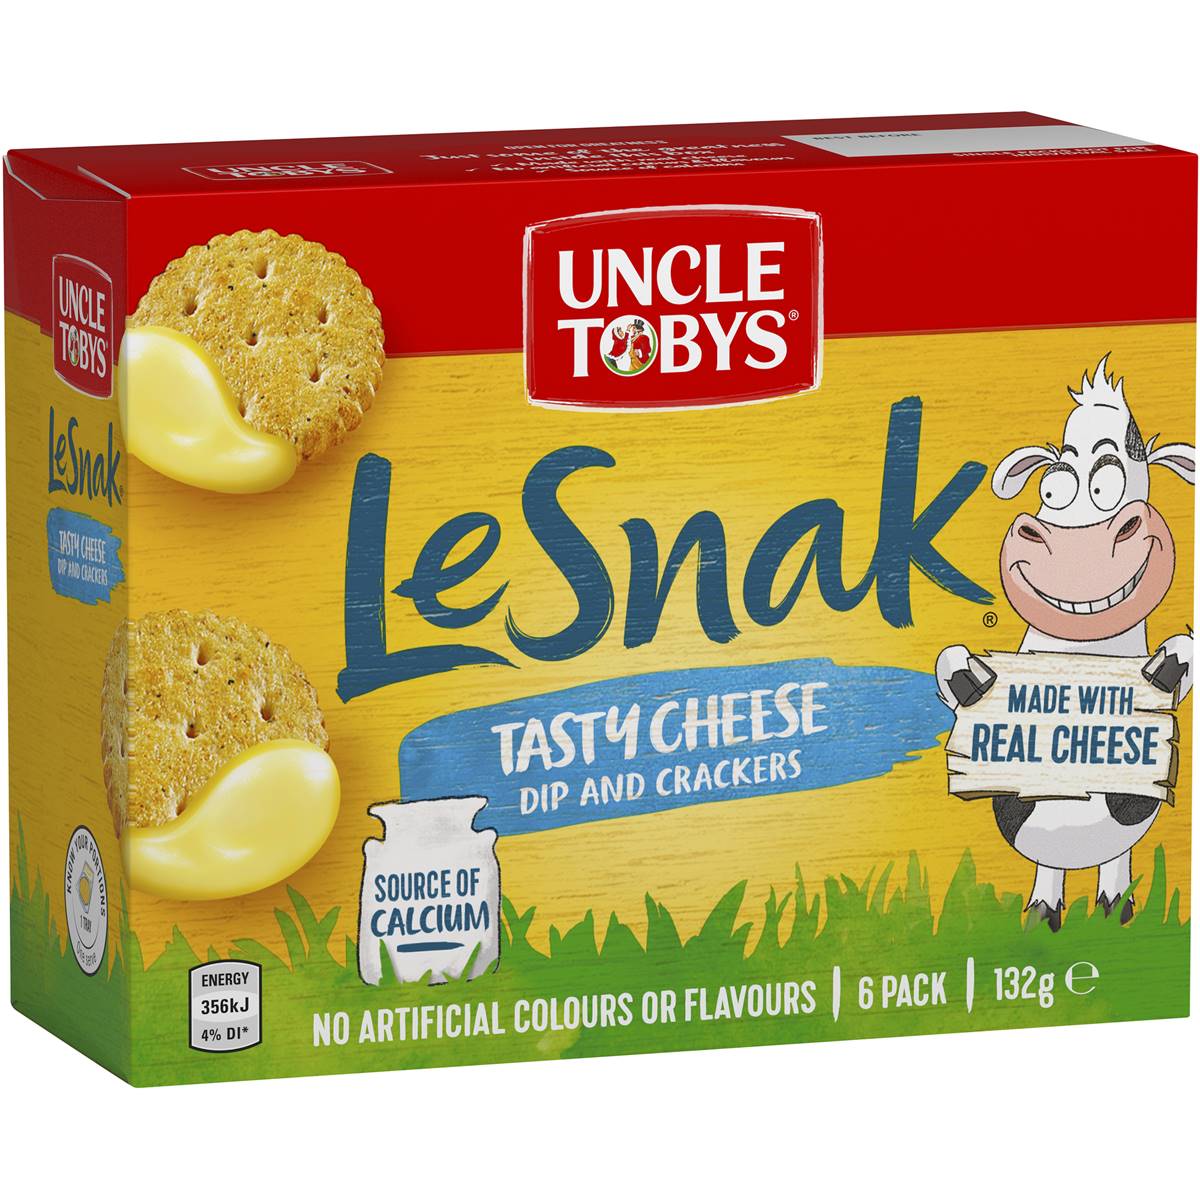 Uncle Tobys Le Snak Tasty Cheese Dip & Crackers